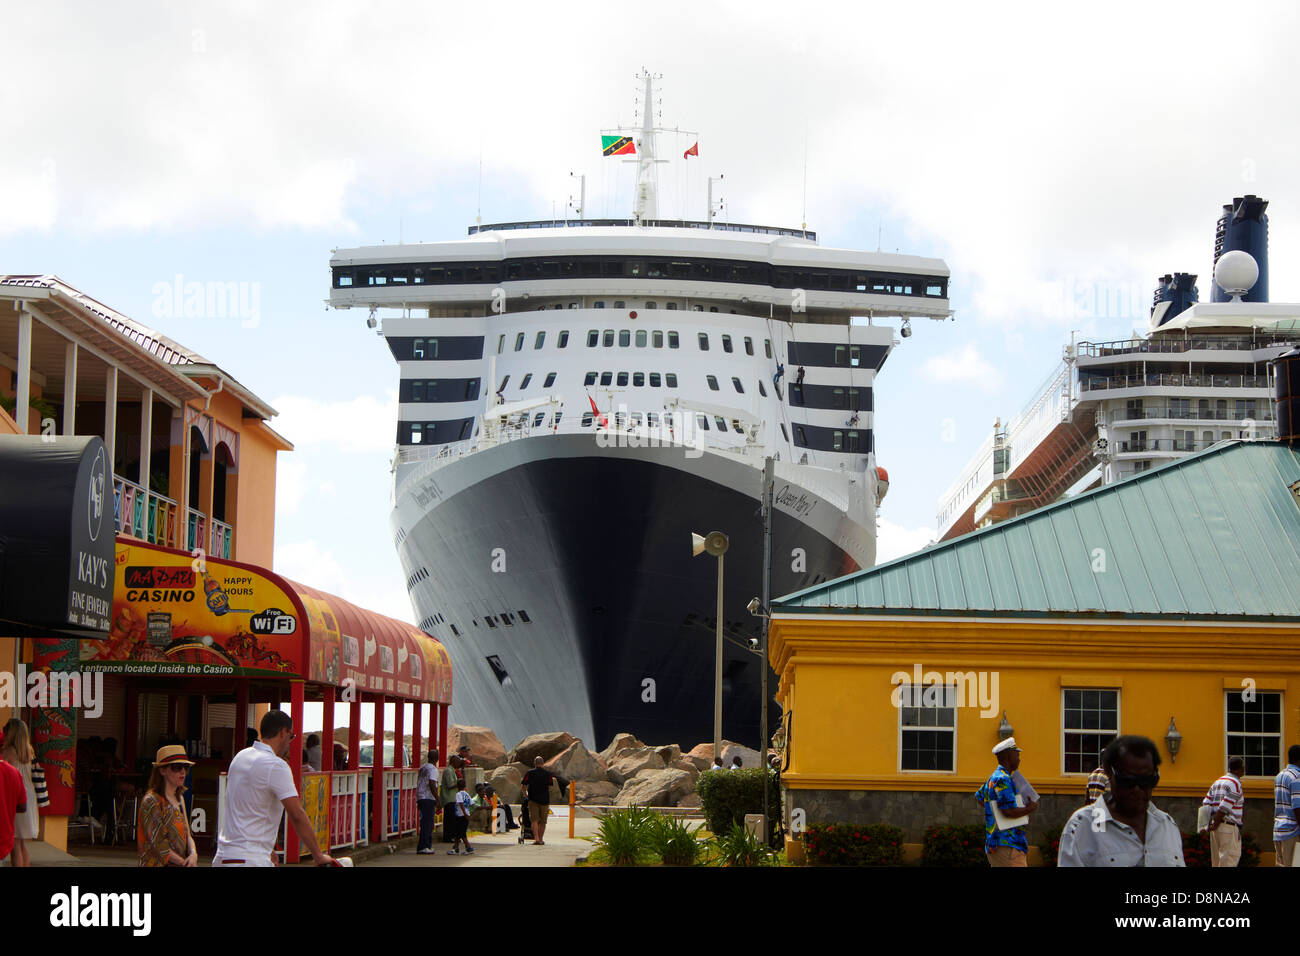 Cunard Queen Mary 2 docked at the Caribbean island of Saint Kitts and Nevis island in the West Indies Stock Photo